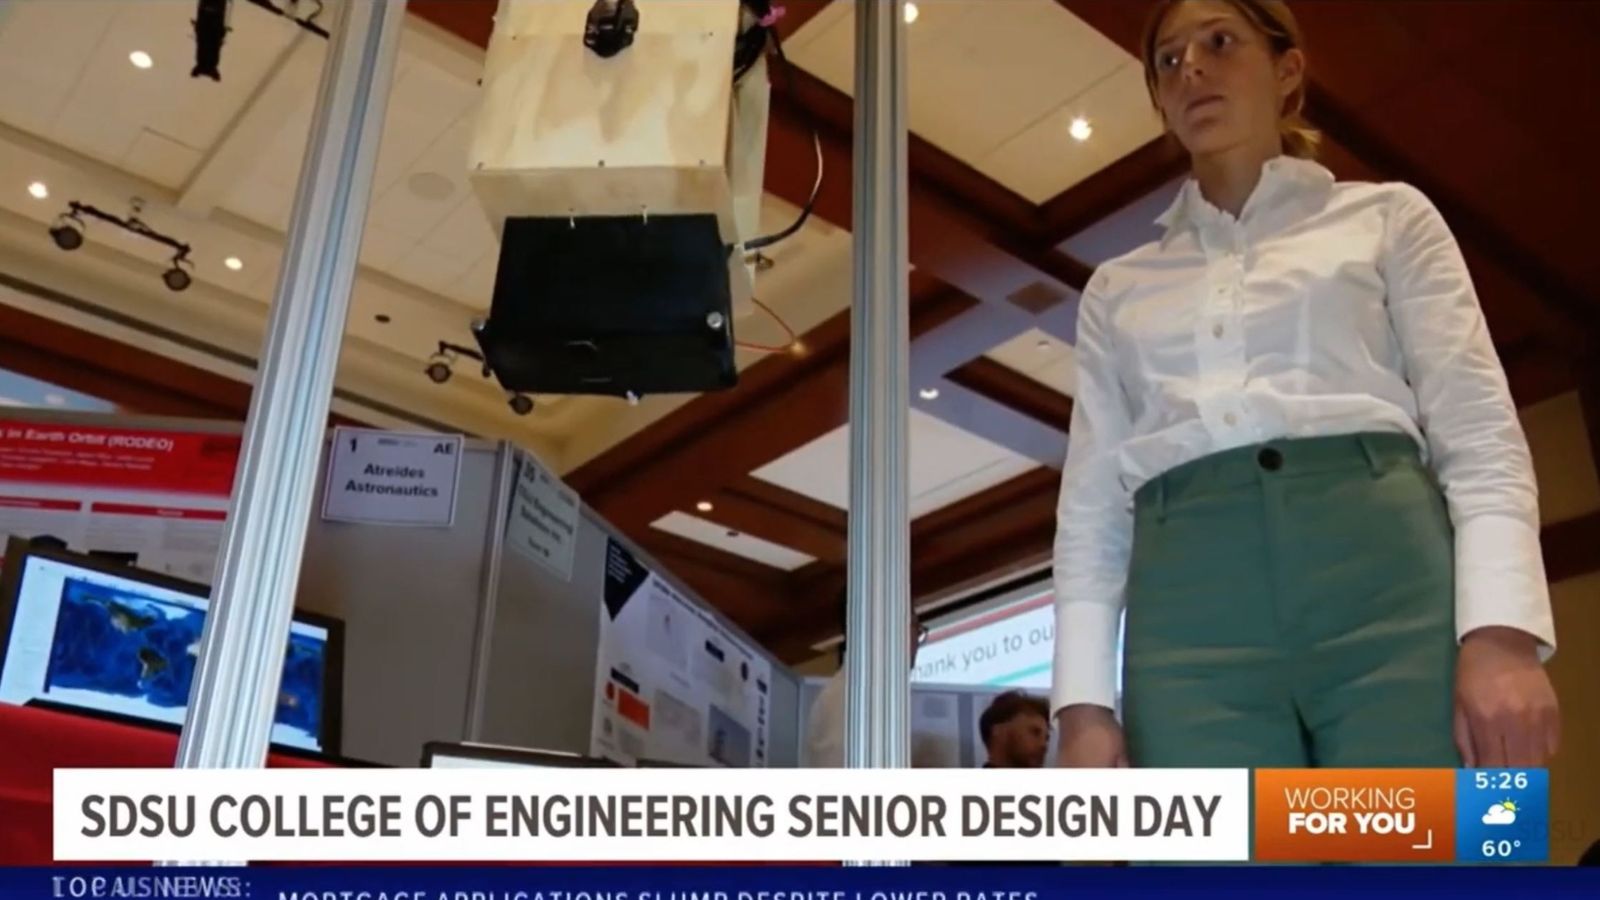 CBS 8 News visited Montezuma Hall and Aerospace Engineering Team RODEO to learn more about Engineering Senior Design Day.